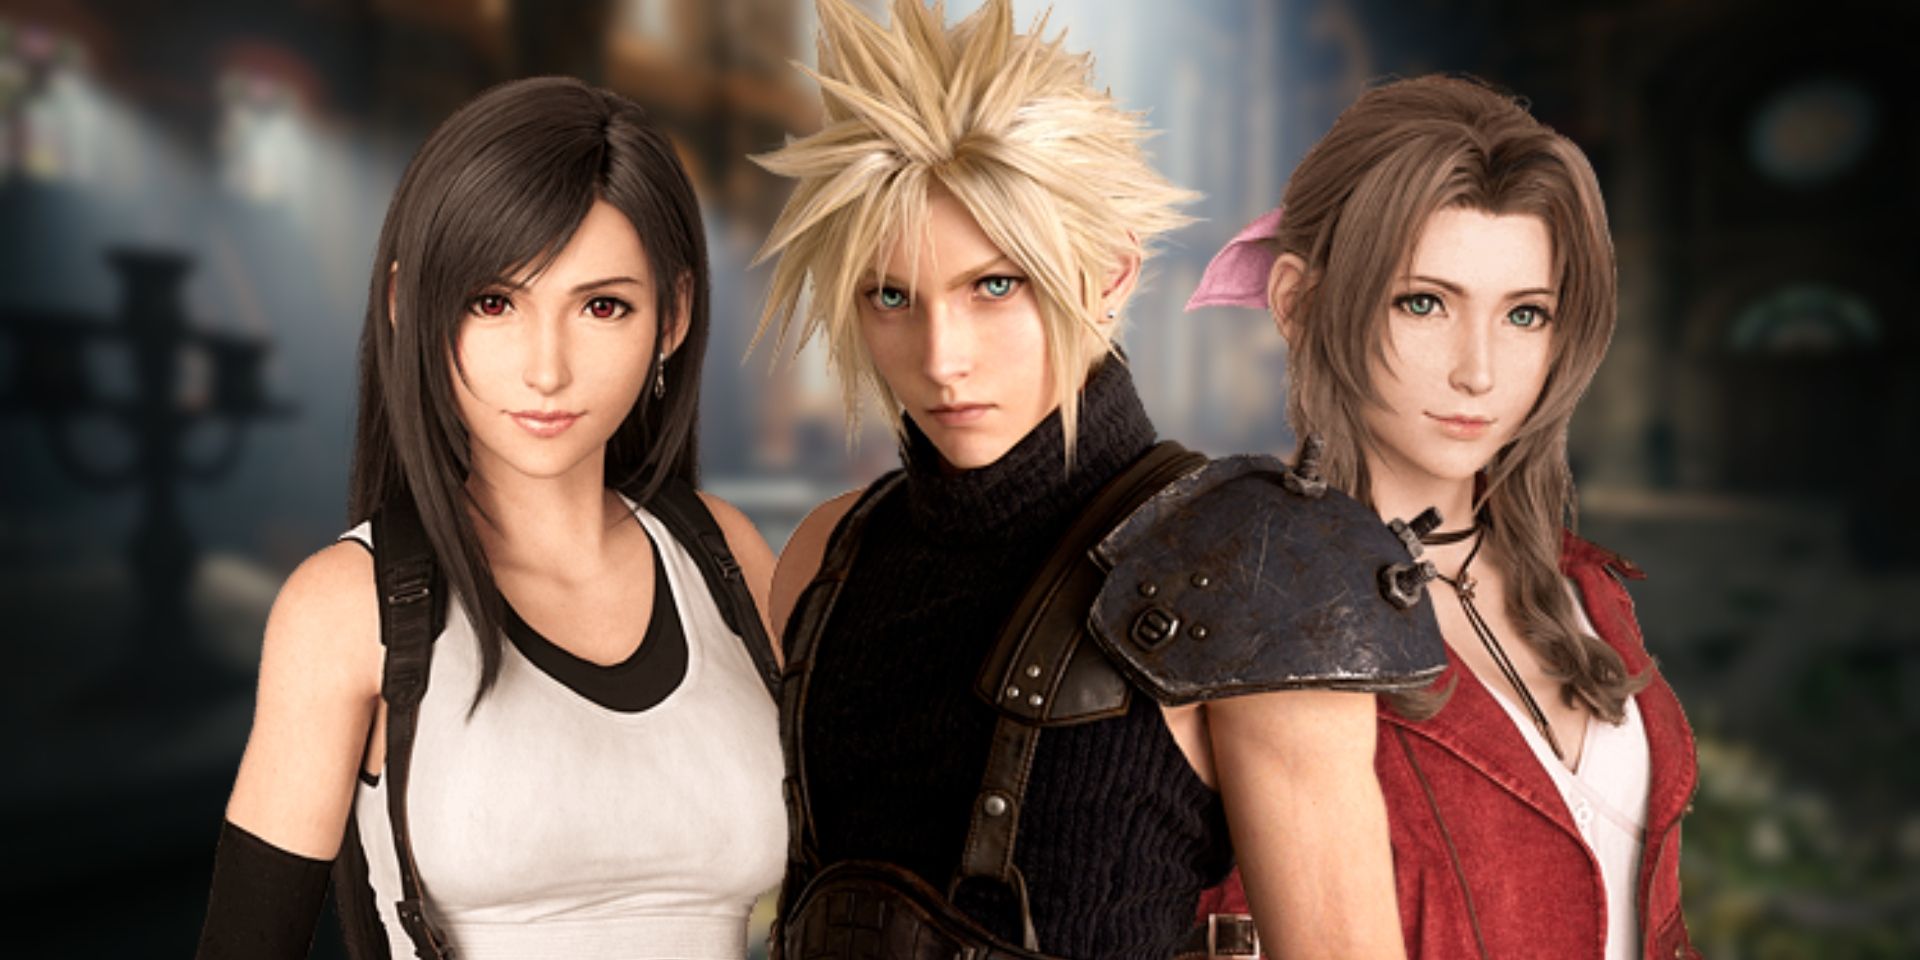 final-fantasy-7-remake-dlc-is-free-in-psn-store-now